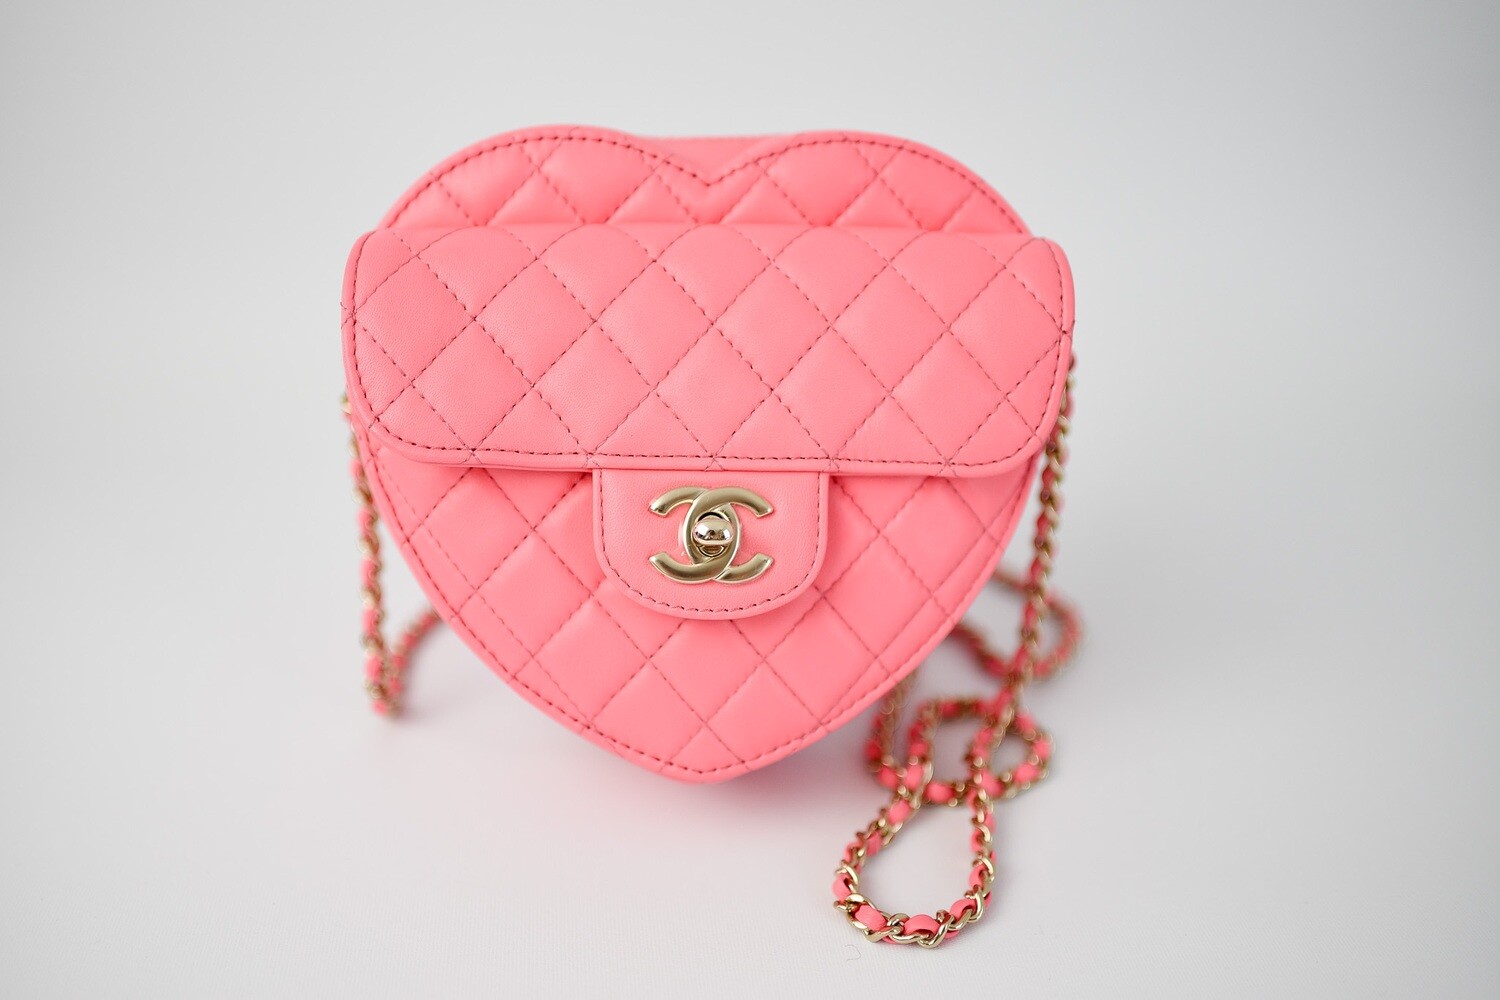 Chanel Heart Bag Large, Pink Lambskin Leather, Gold Hardware, Like New in  Dustbag GA001